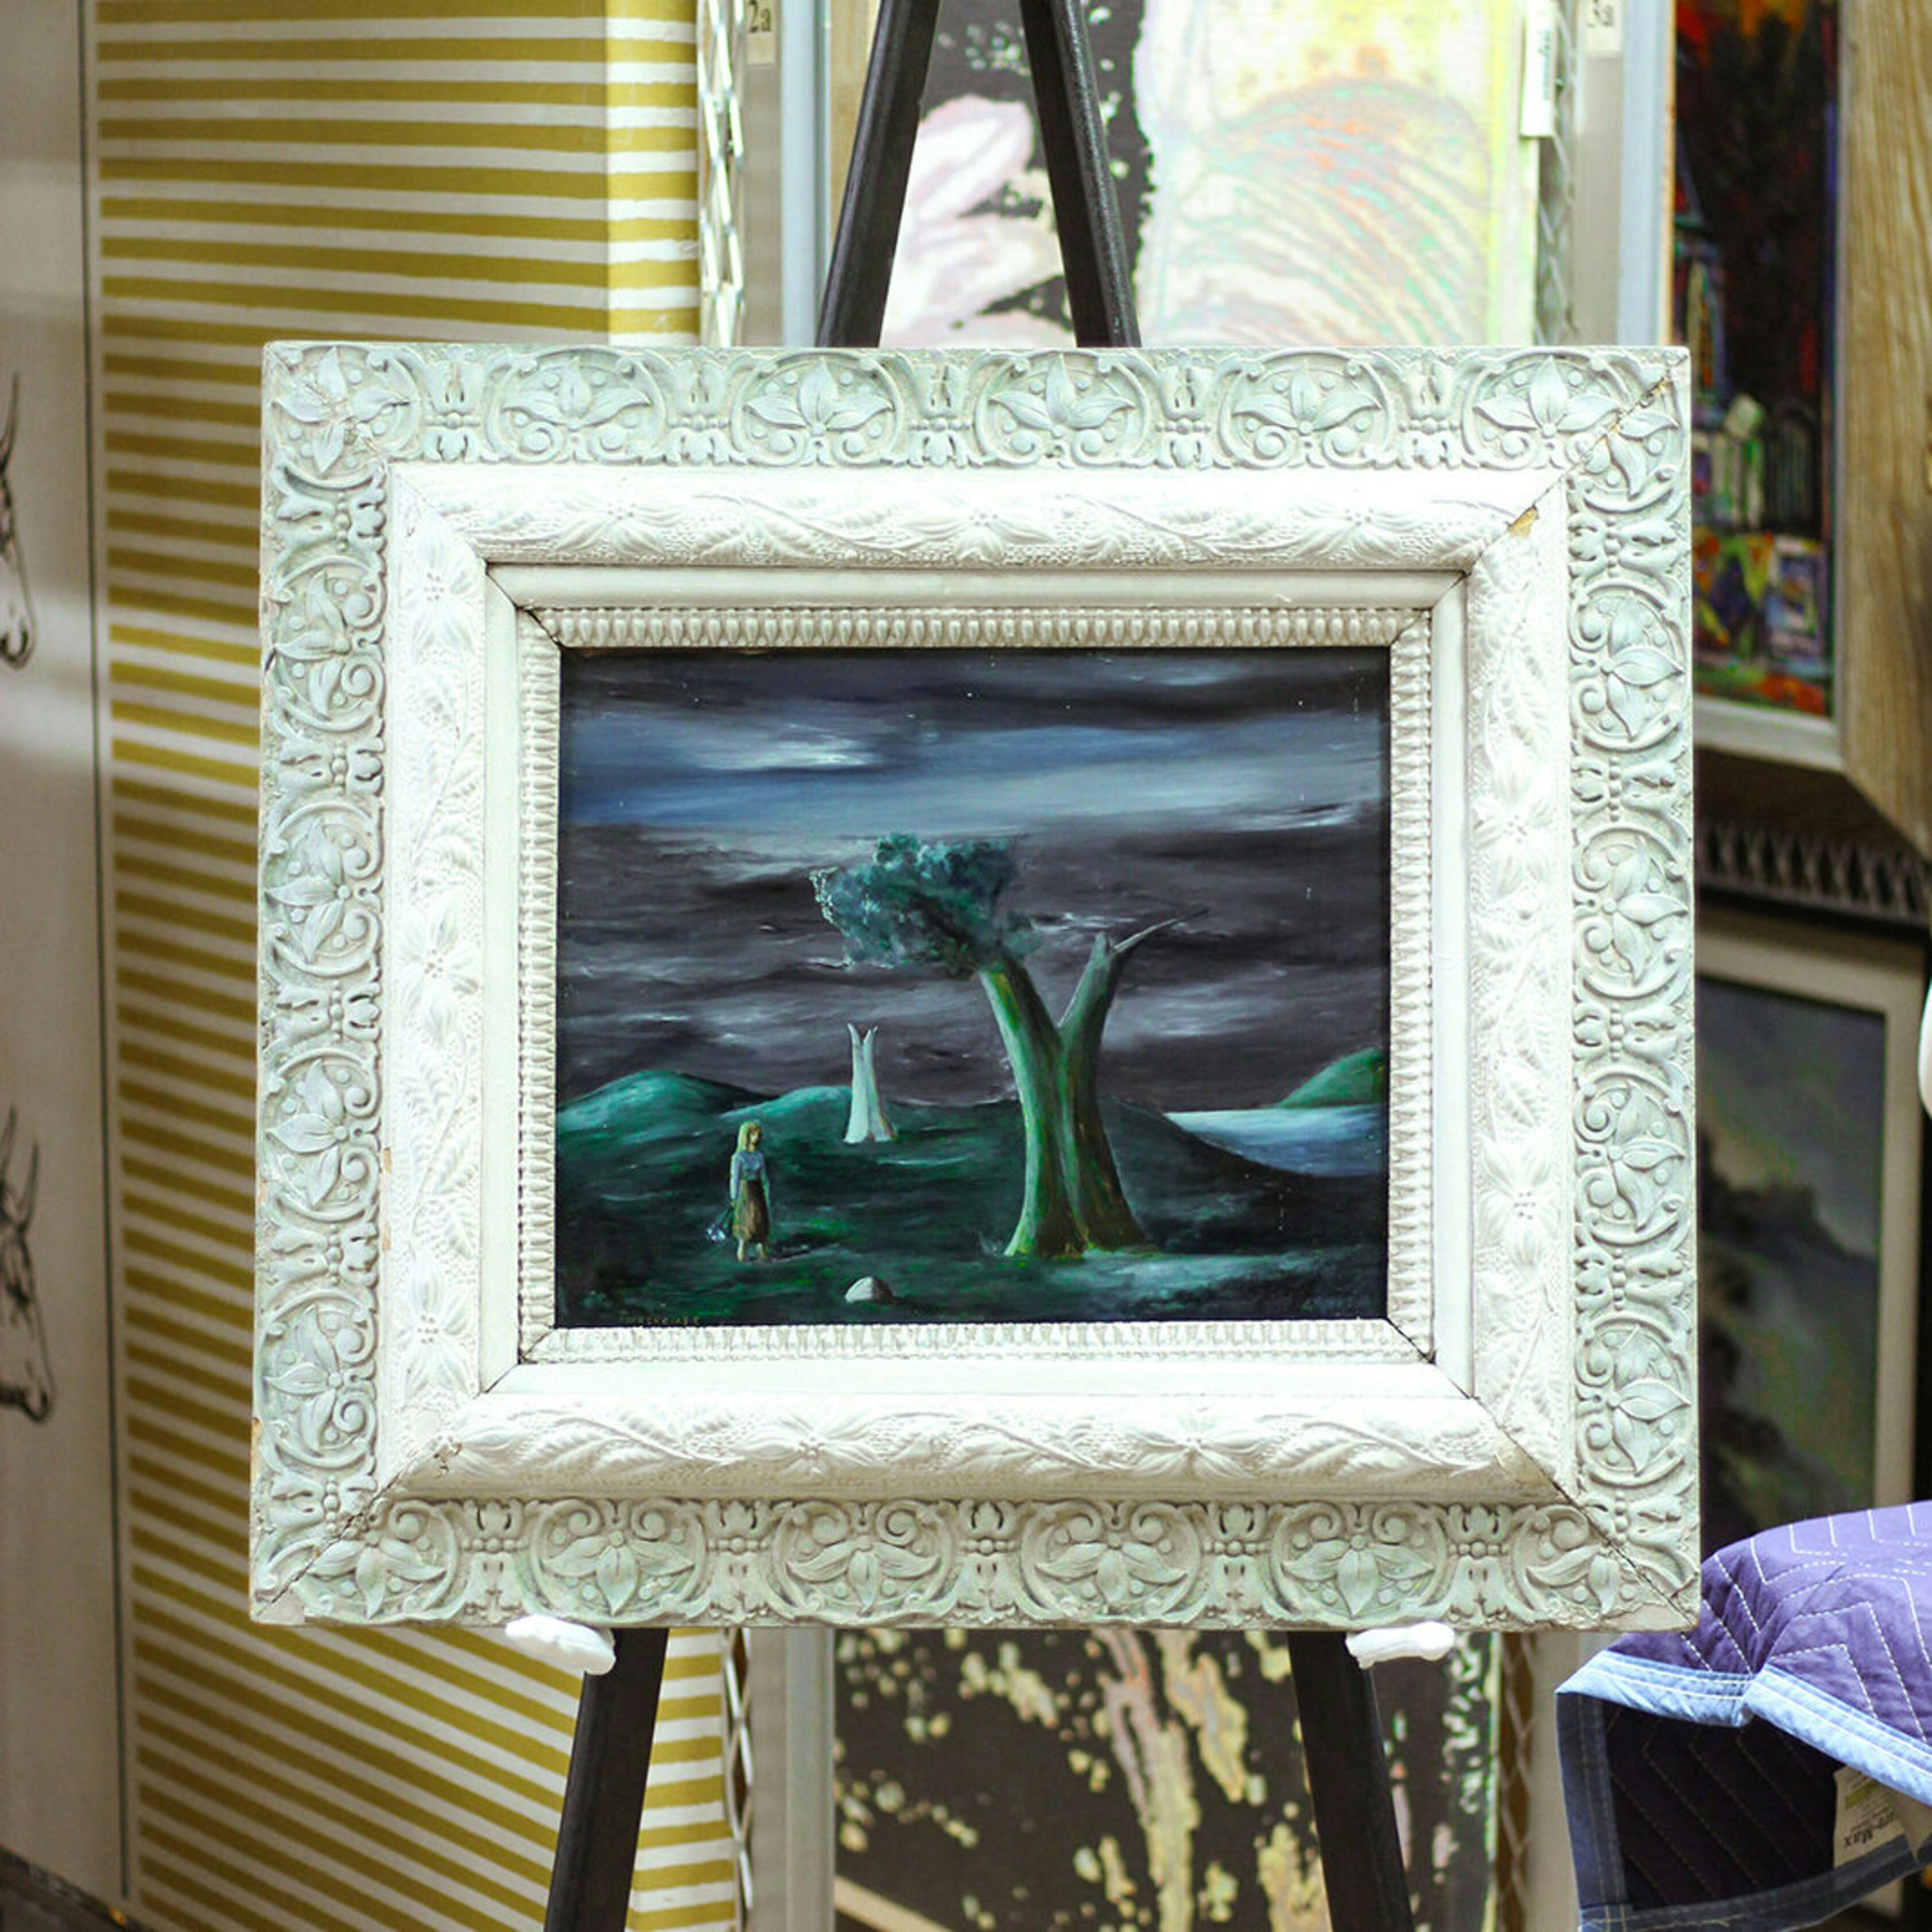 Gertrude abercrombie frame conservation uama collection art museum tucson